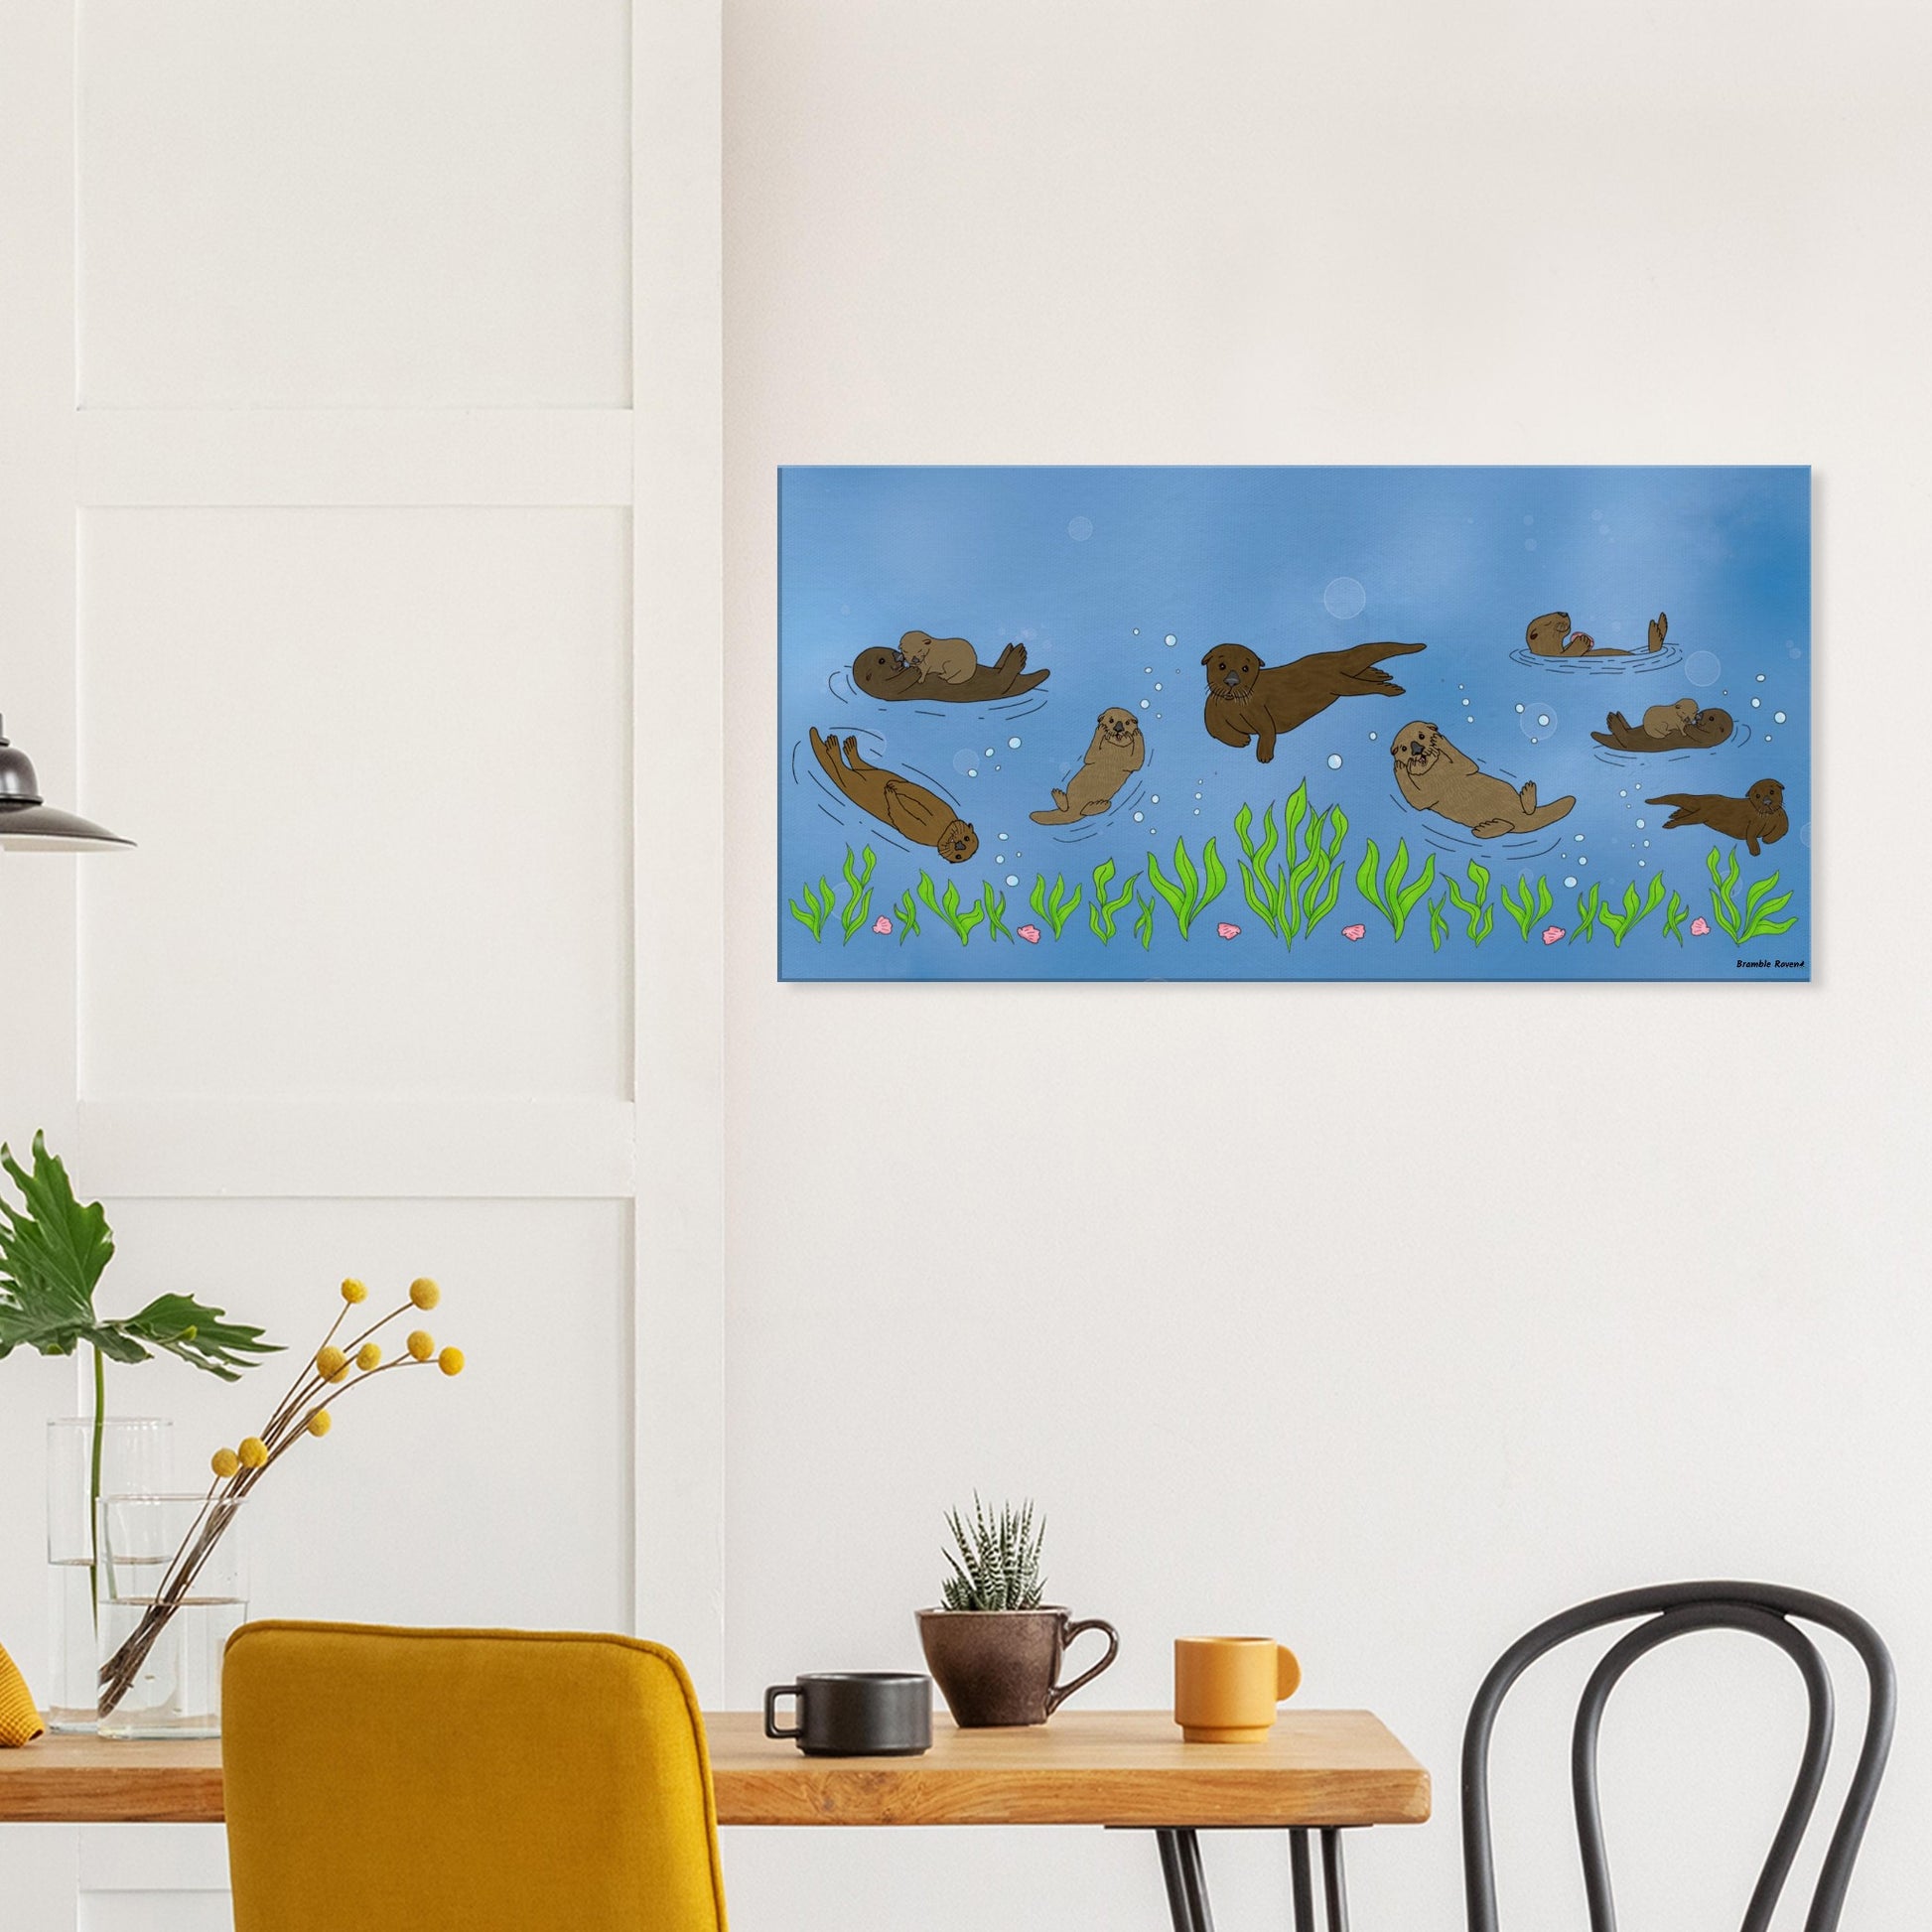 20 by 40 inch slim canvas wall art print of sea otters swimming along the seabed. Shown on wall above wooden kitchen table, cups and chairs.